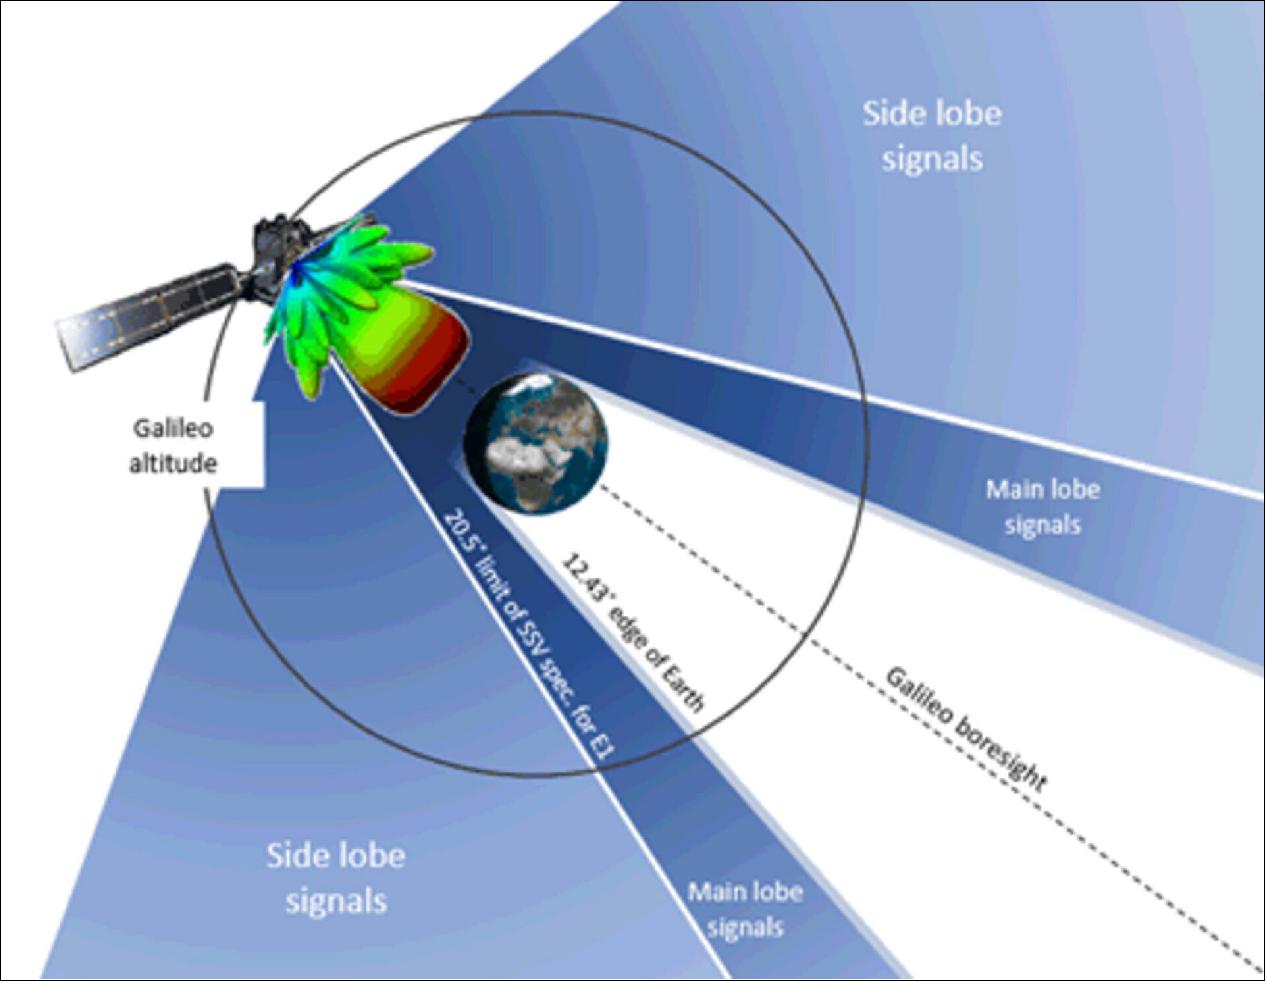 Figure 19: Galileo 'side lobe' signals. Navigation satellites – such as Europe's Galileo, the US GPS, Russia’s GLONASS or their Japanese, Chinese and Indian counterparts – aim their antennas directly at Earth. Any satellite orbiting above these constellation can only hope to detect signals from over Earth’s far side, but the majority are blocked by the planet. For a position fix, a satnav receiver requires a minimum of four satellites to be visible, but this is most of the time not possible if based solely on front-facing signals. Instead, satnav receivers in higher orbits can make use of signals emitted sideways from navigation antennas, within what is known as ‘side lobes’. Just like a flashlight, radio antennas shine energy to the side as well as directly forward (image credit: ESA)